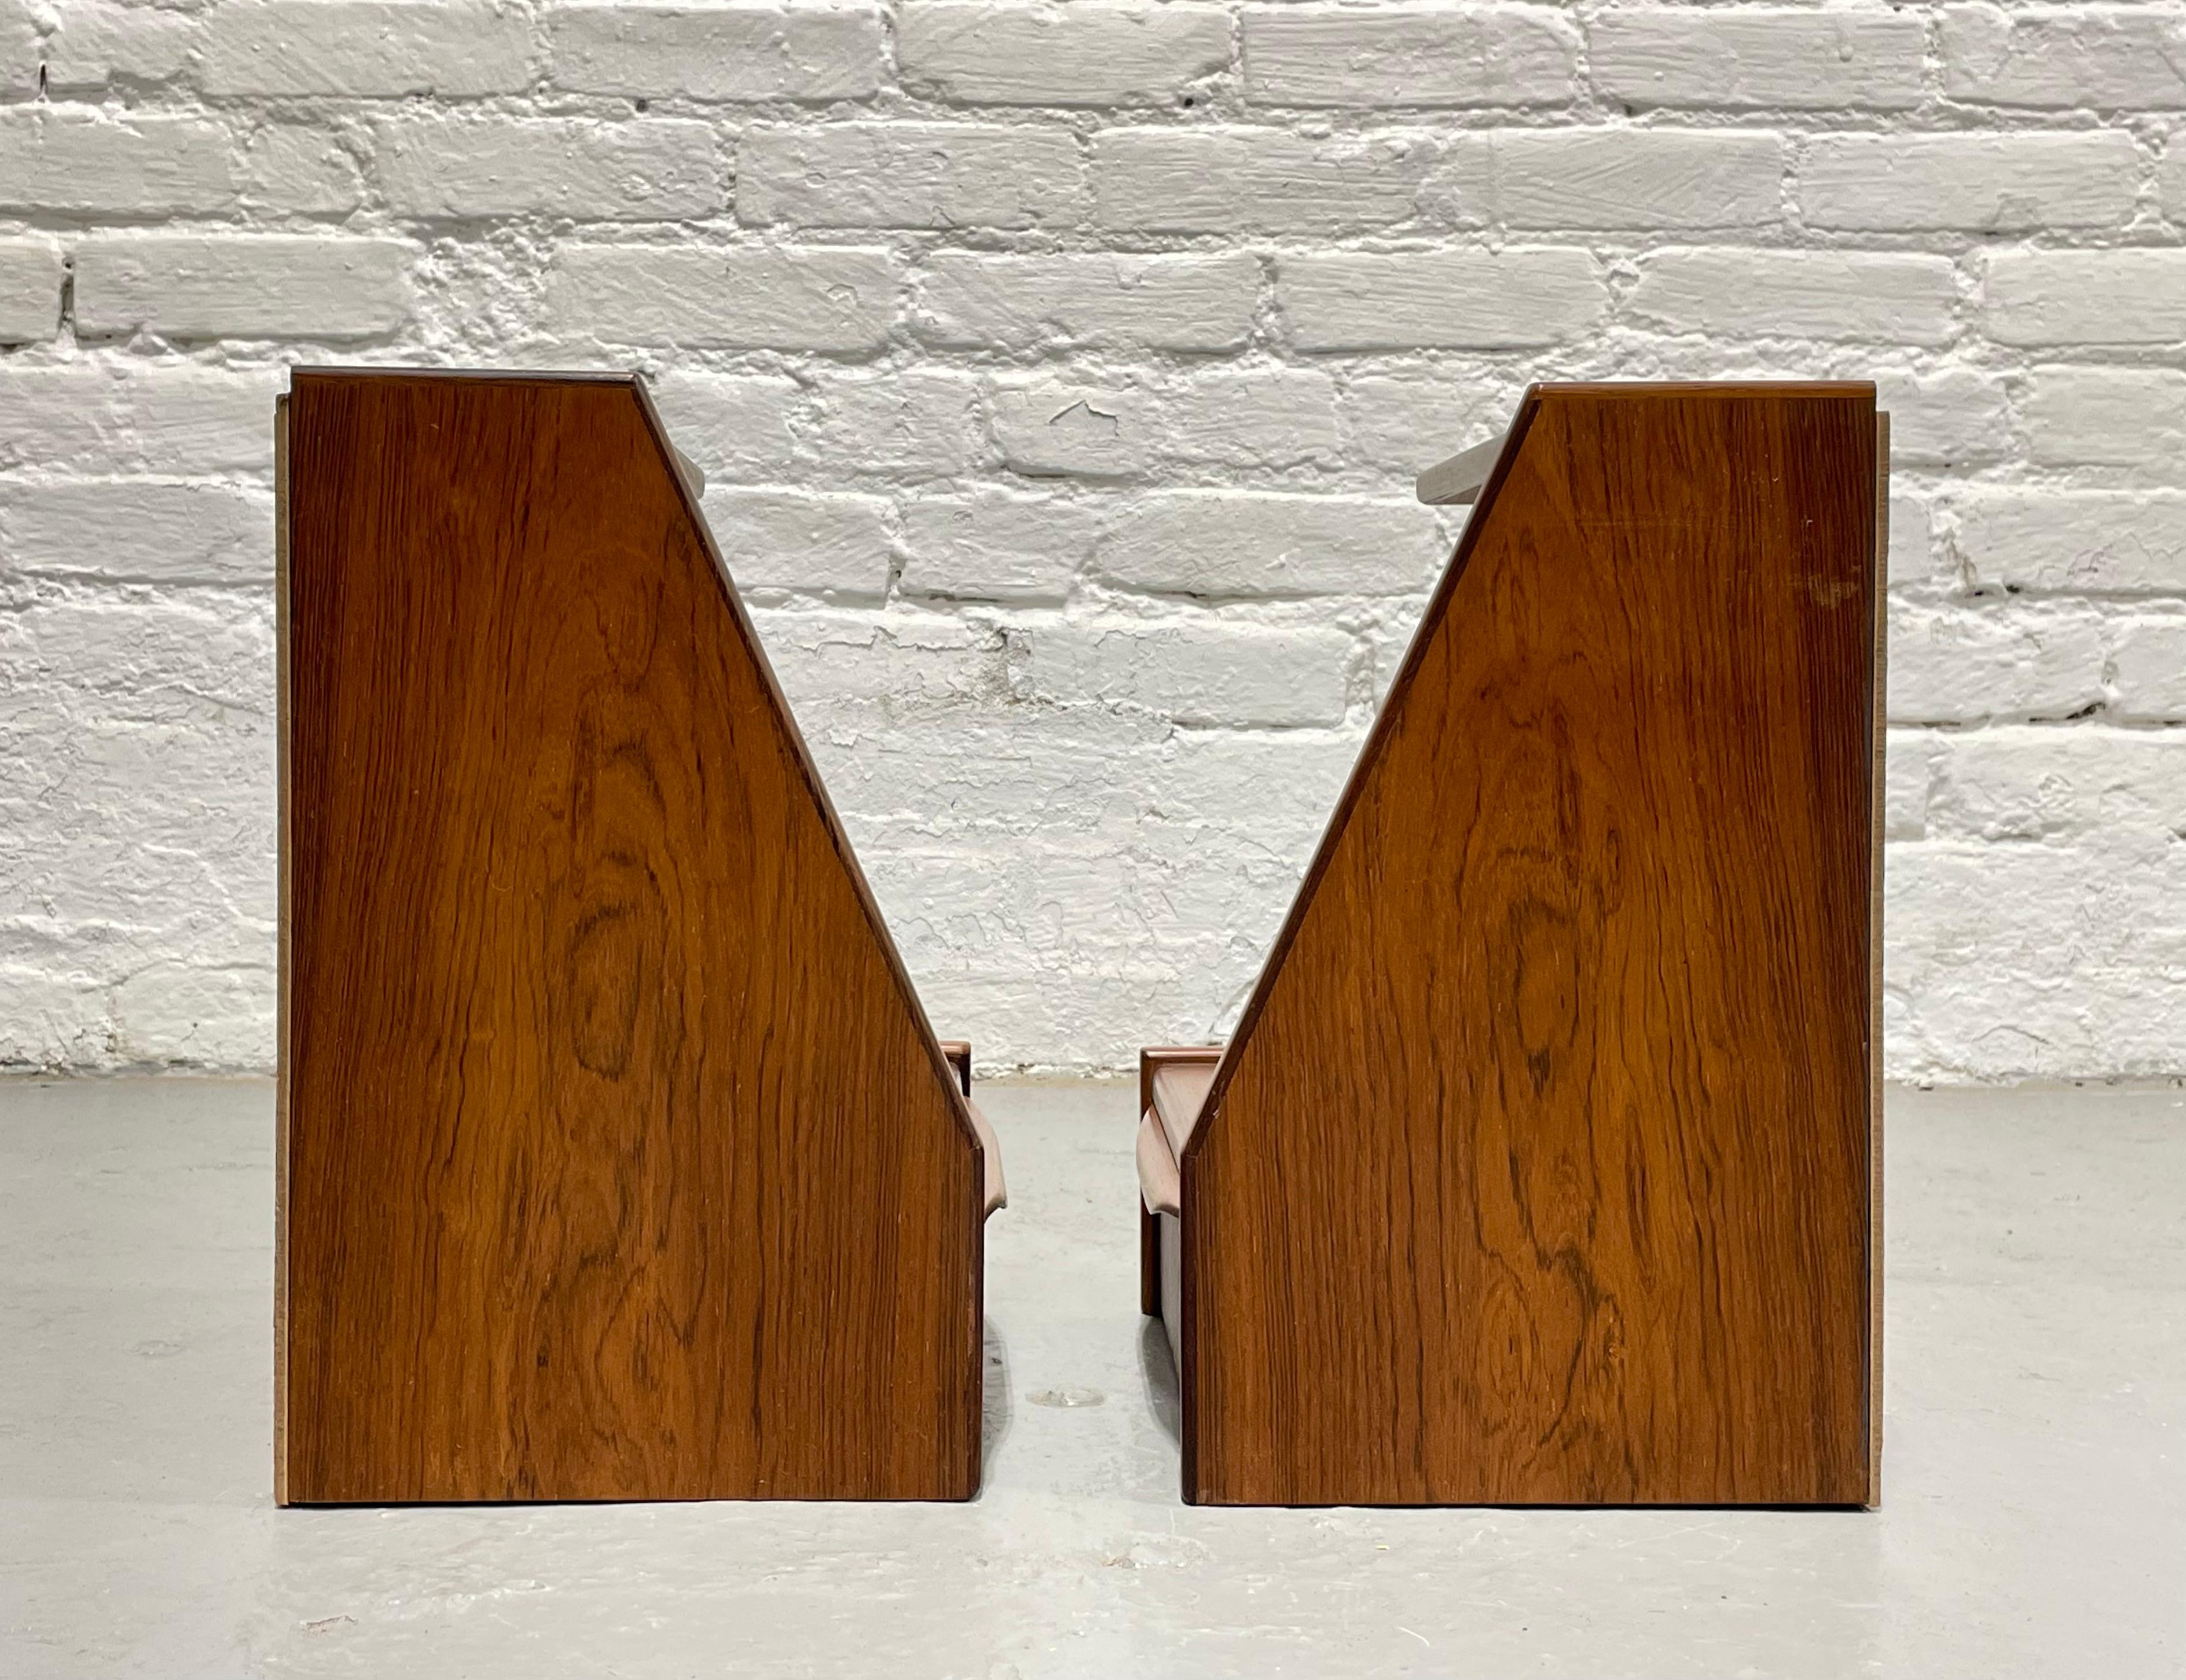 Mid-20th Century DANISH Mid Century Modern ROSEWOOD Hanging NIGHTSTANDS / Bedside Tables, c. 1950 For Sale